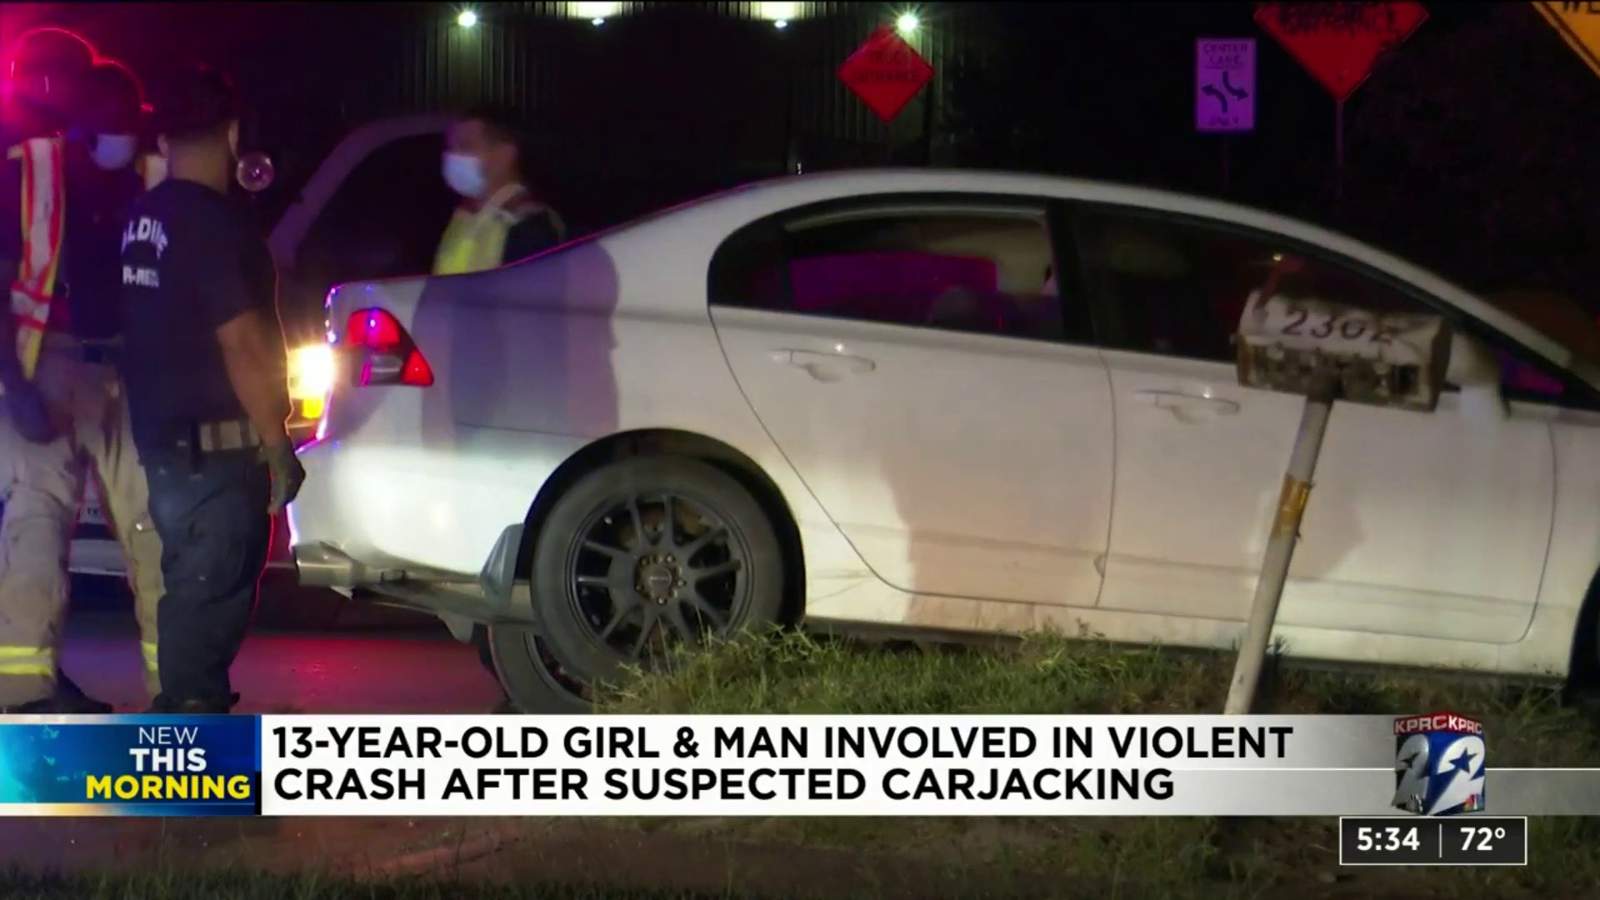 13-year-old girl and man involved in violent crash after suspected carjacking, police say